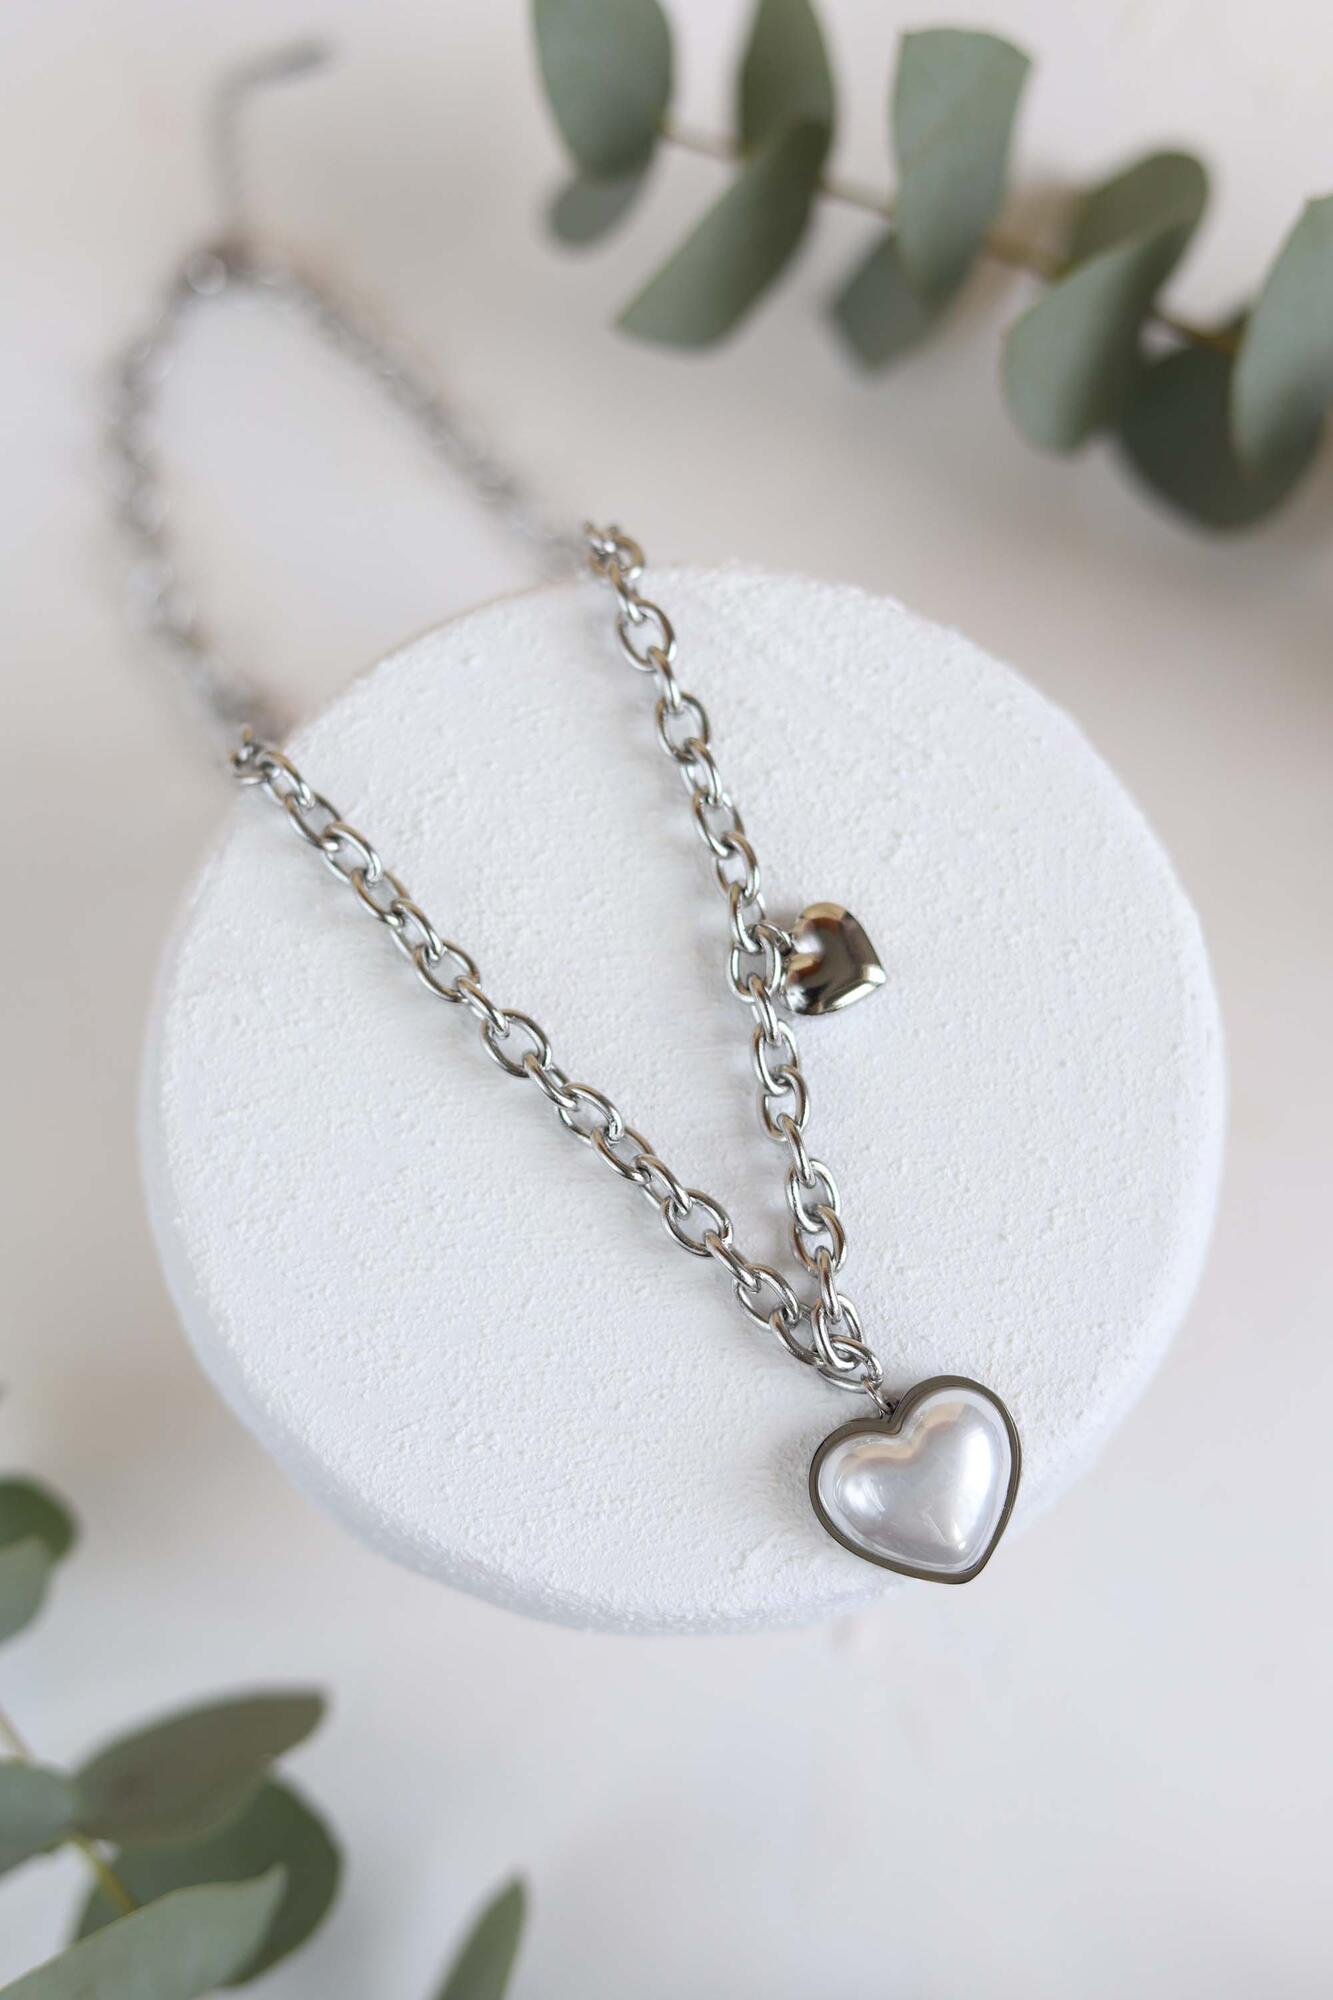 Psoriasis-hearted silver necklace